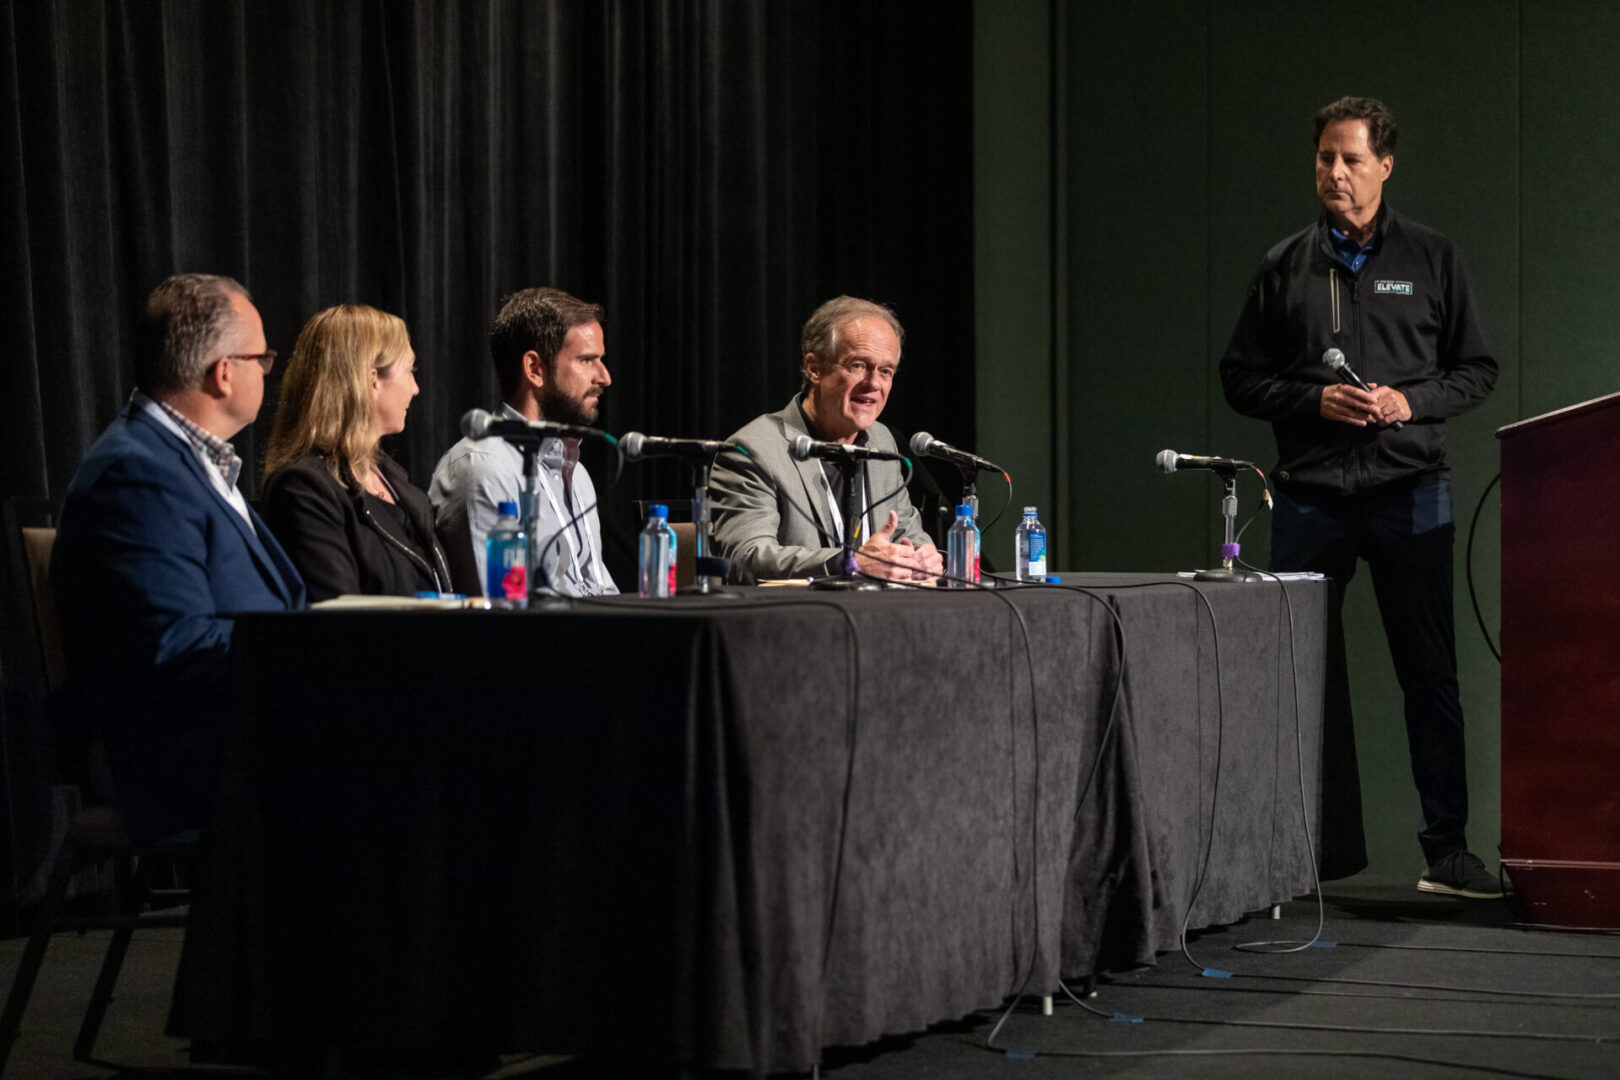 David Gee moderating a panel discussion at a conference in Orlando